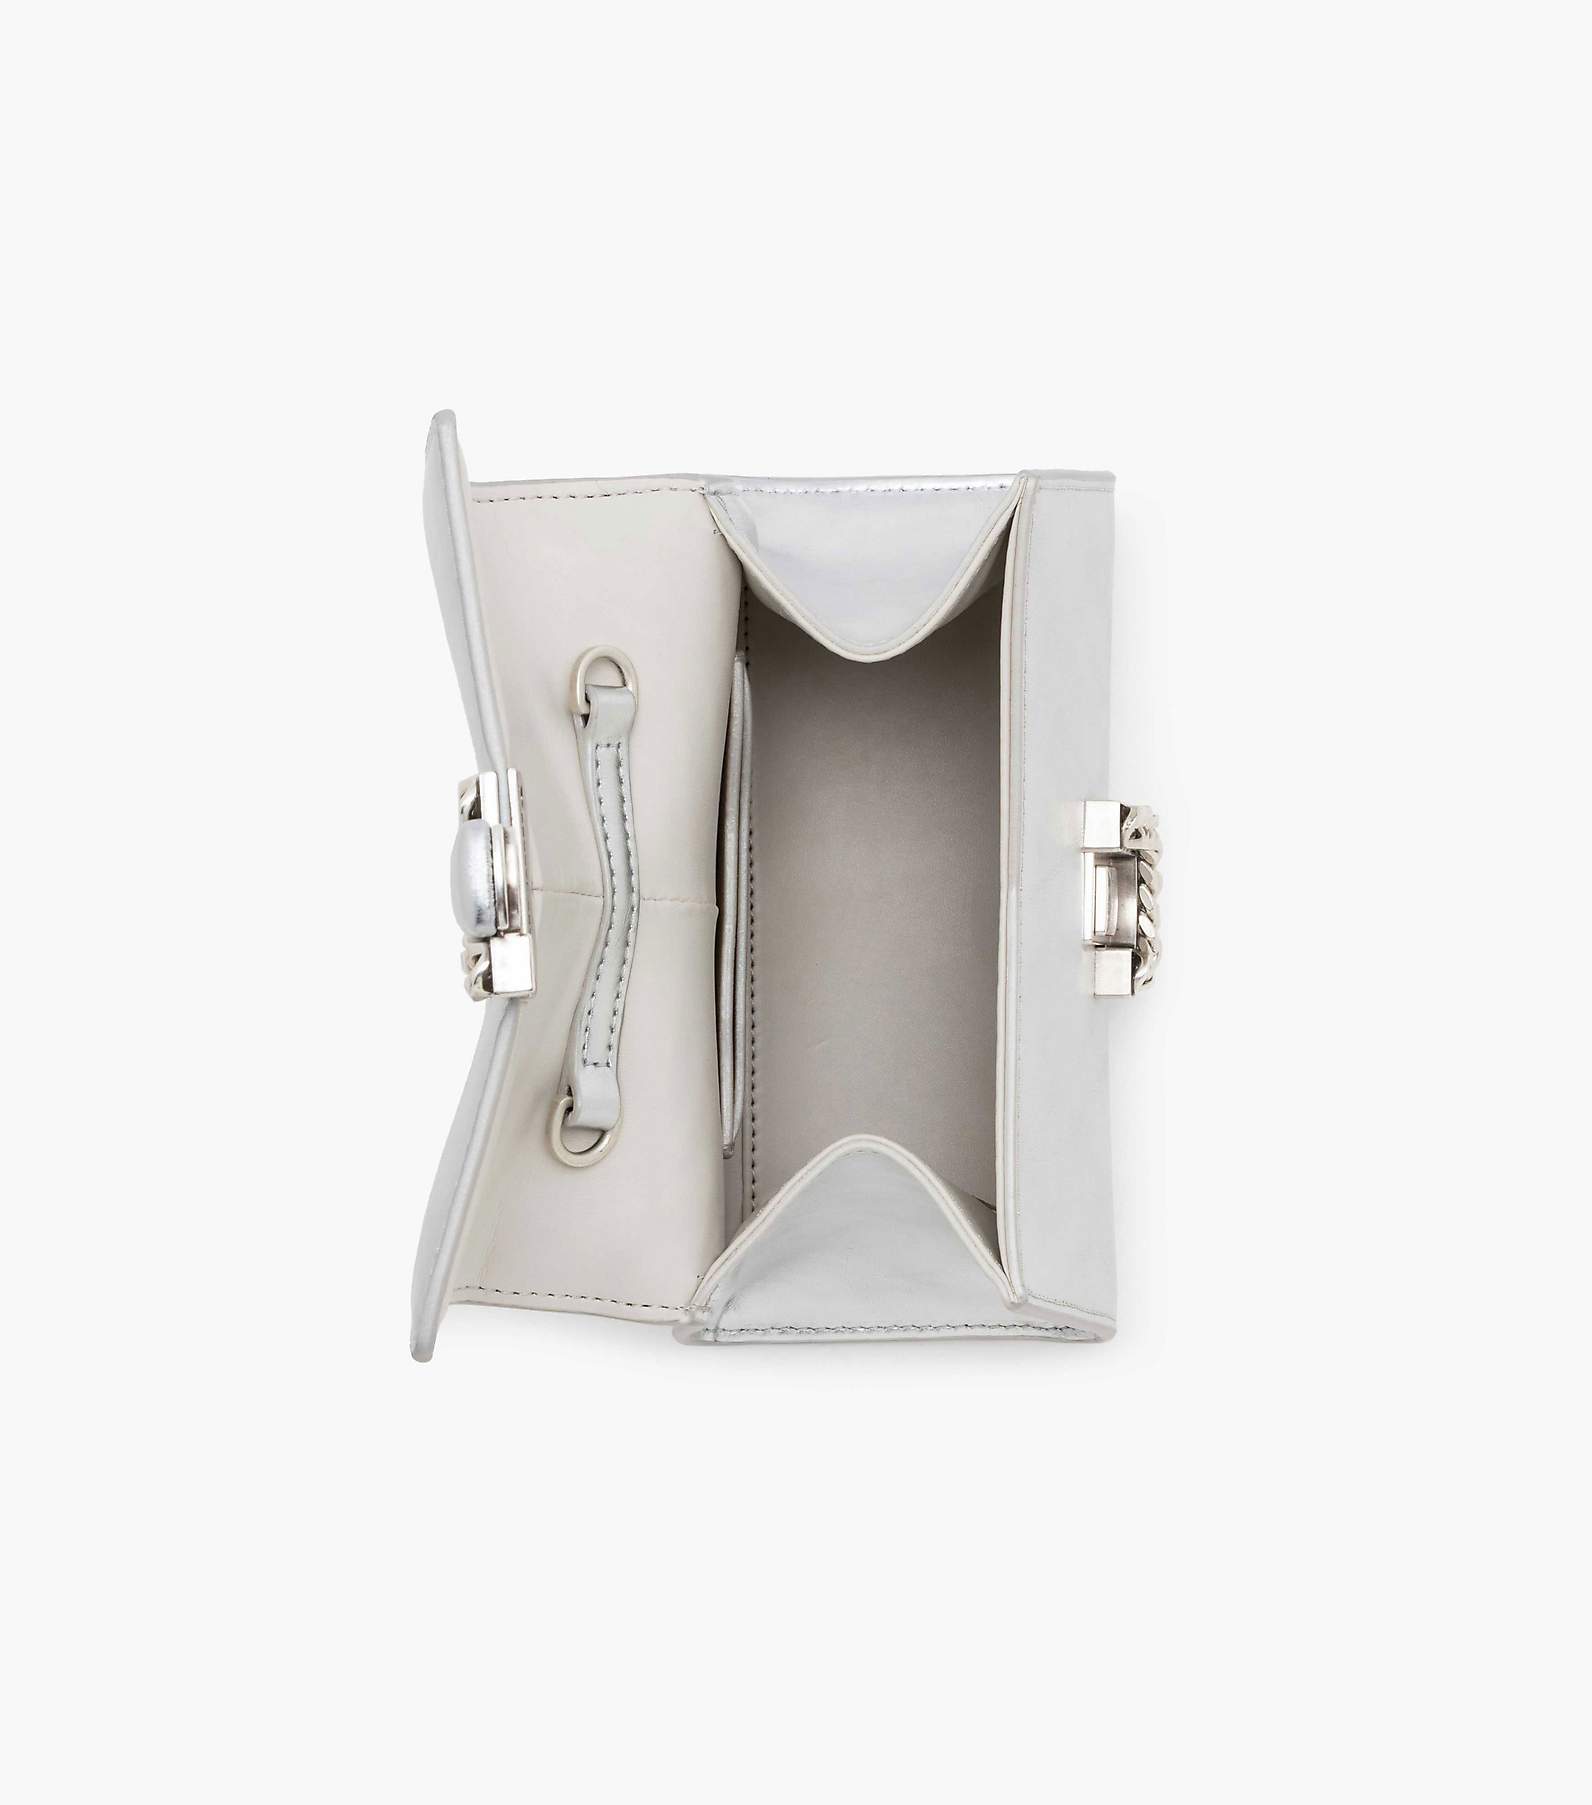 Marc Jacobs The Tote Bag Silver Necklace